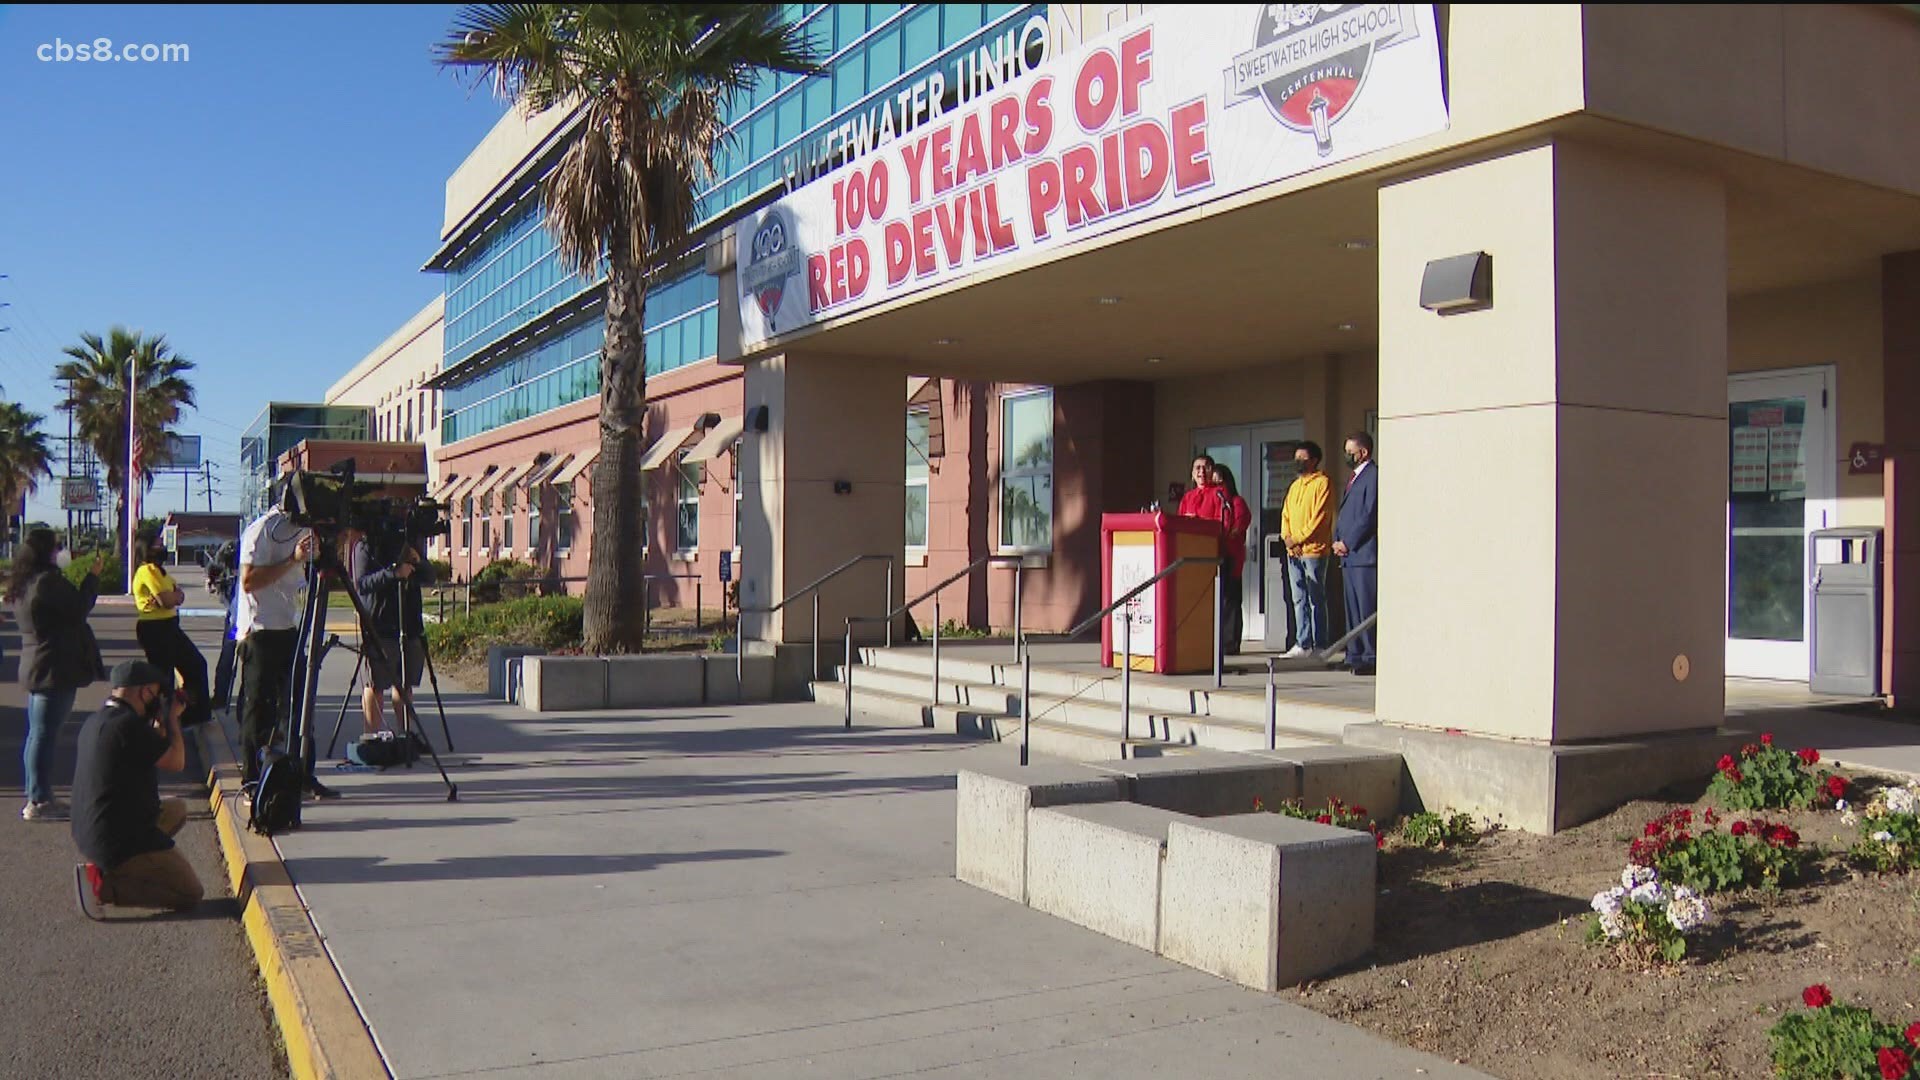 The event aimed to vaccinate 500 Sweetwater High School students.